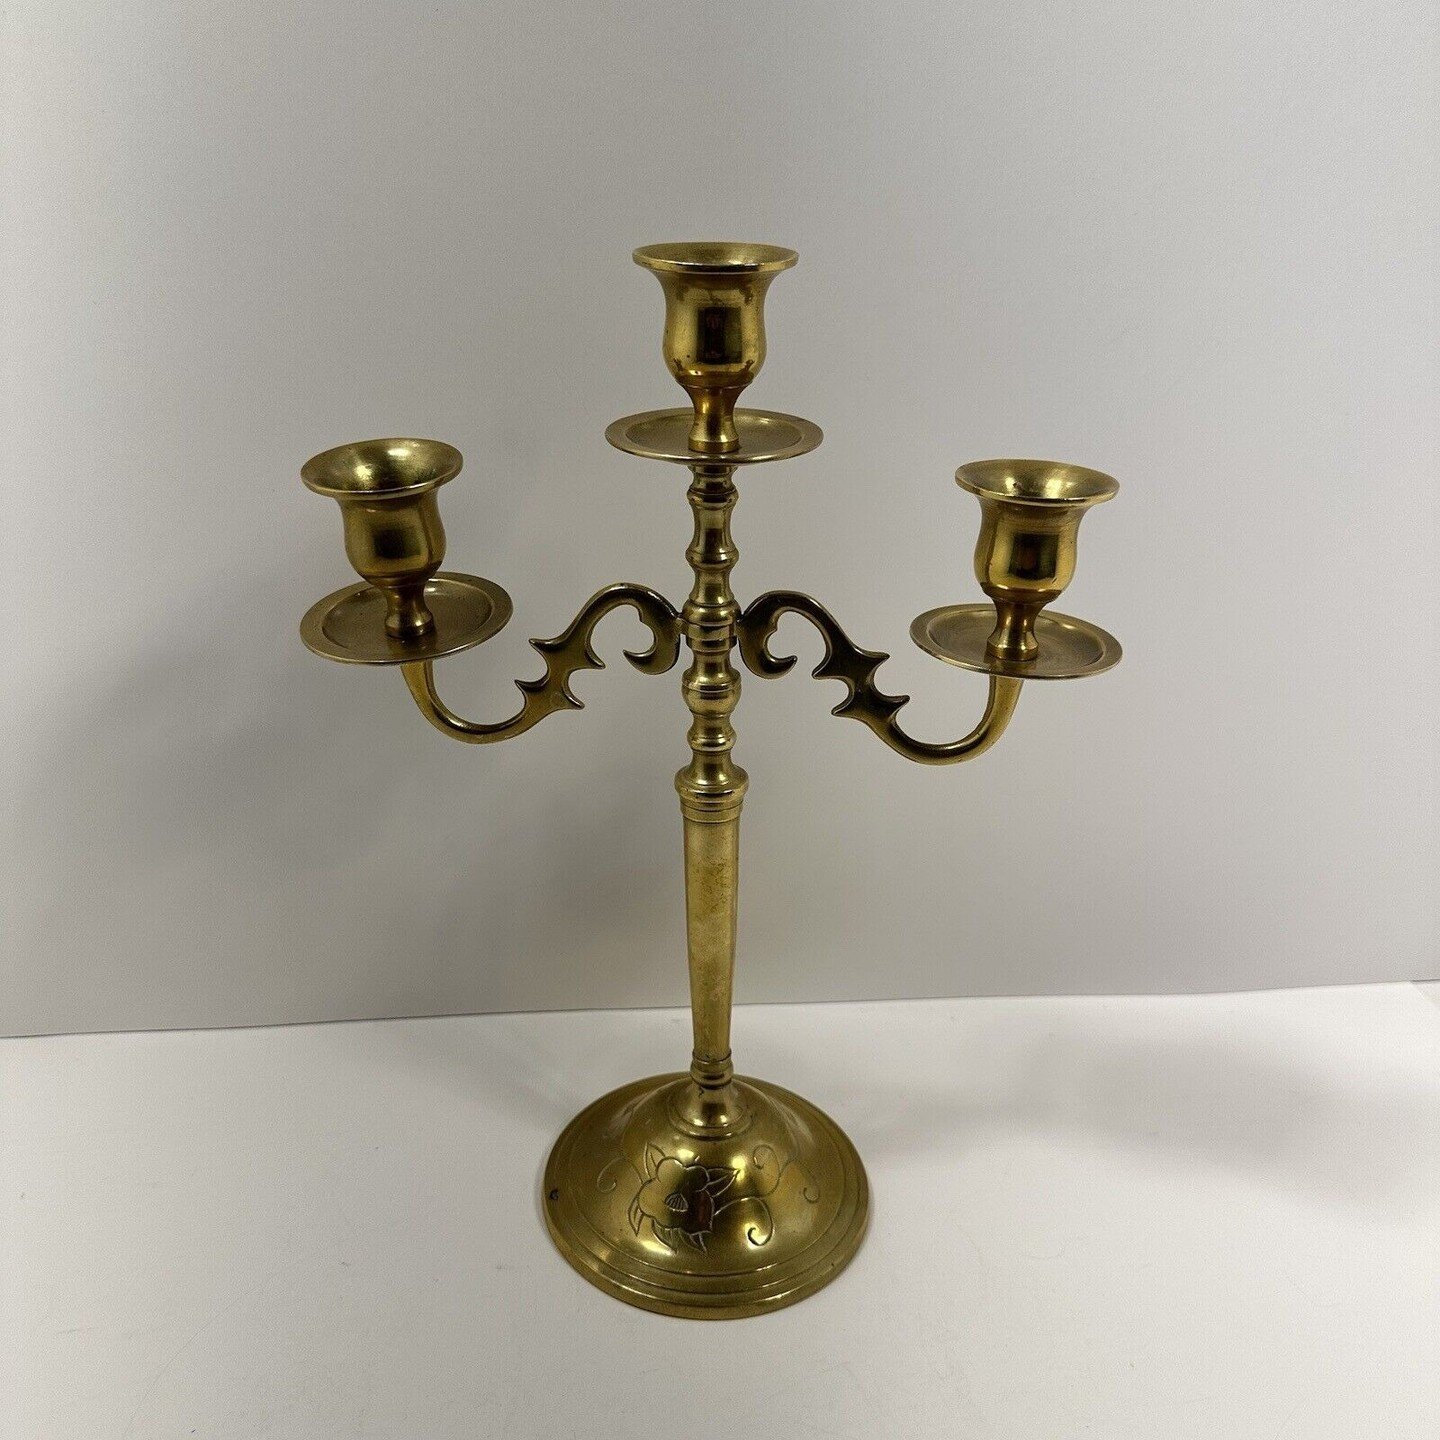 Vintage Brass 10 Inch Candleabra Candle Stick Holder 3 Tapers Floral Etchings
$17.99

Nice bright brass color with floral etchings. Good condition. some signs of wear and wax on interior. No branding.

#ebayseller 
#mercariseller 
#etsyseller 
#vinta